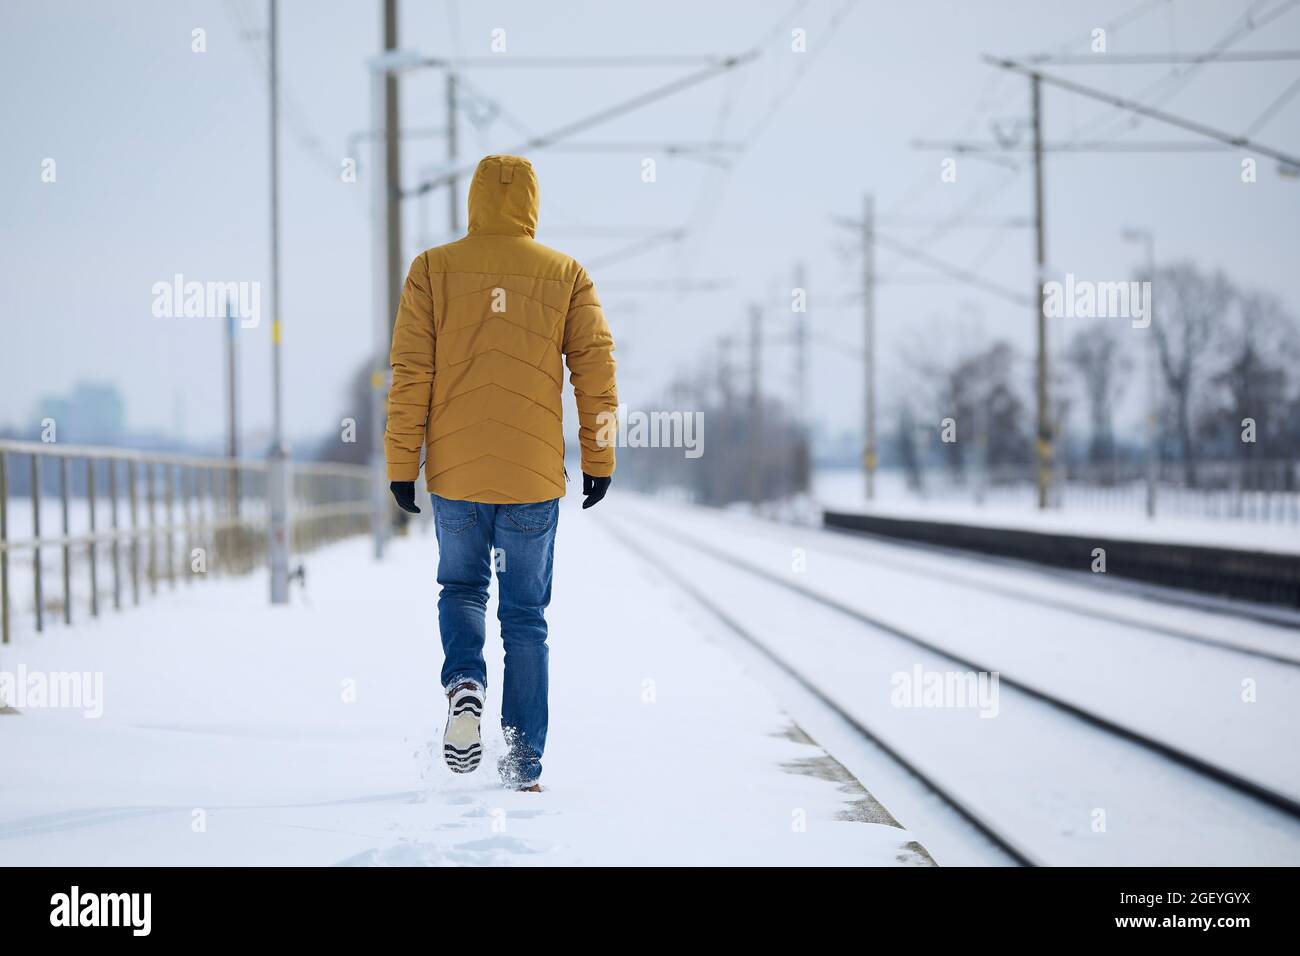 Rear view of loneliness person in warm clothing. Man leaves train station against snowy landscape. Stock Photo